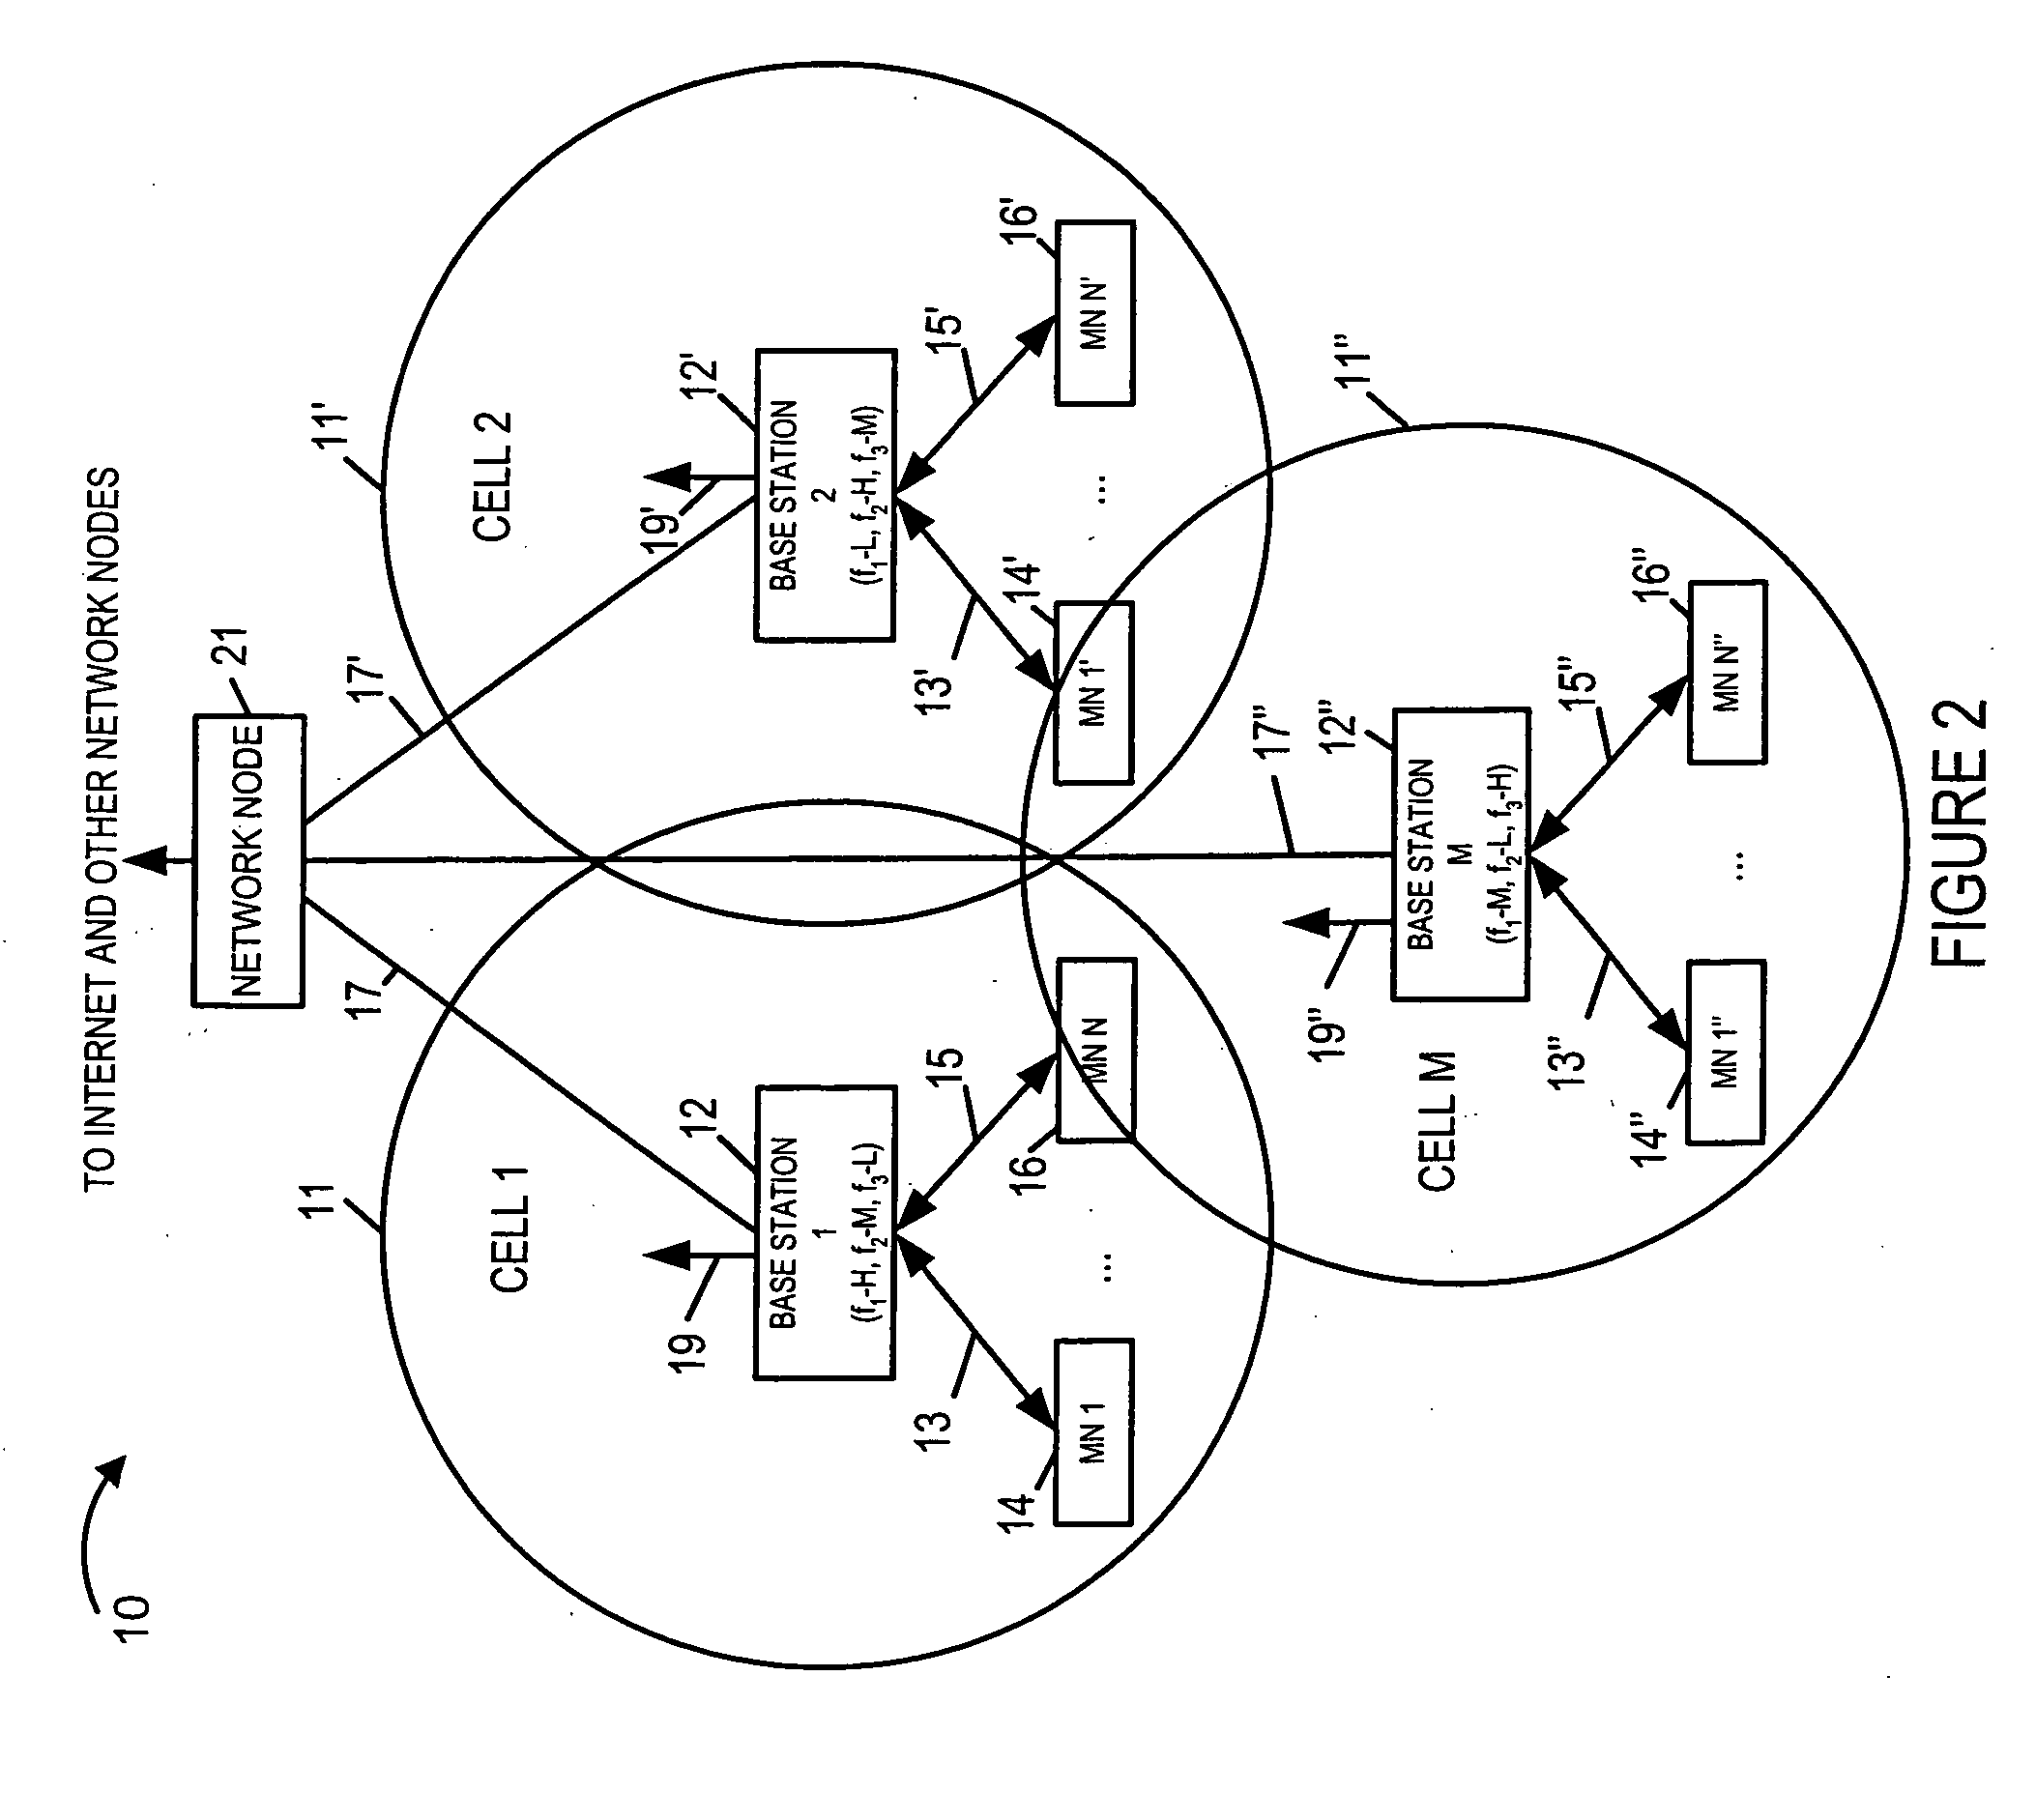 Wireless terminal location using apparatus and methods employing carrier diversity